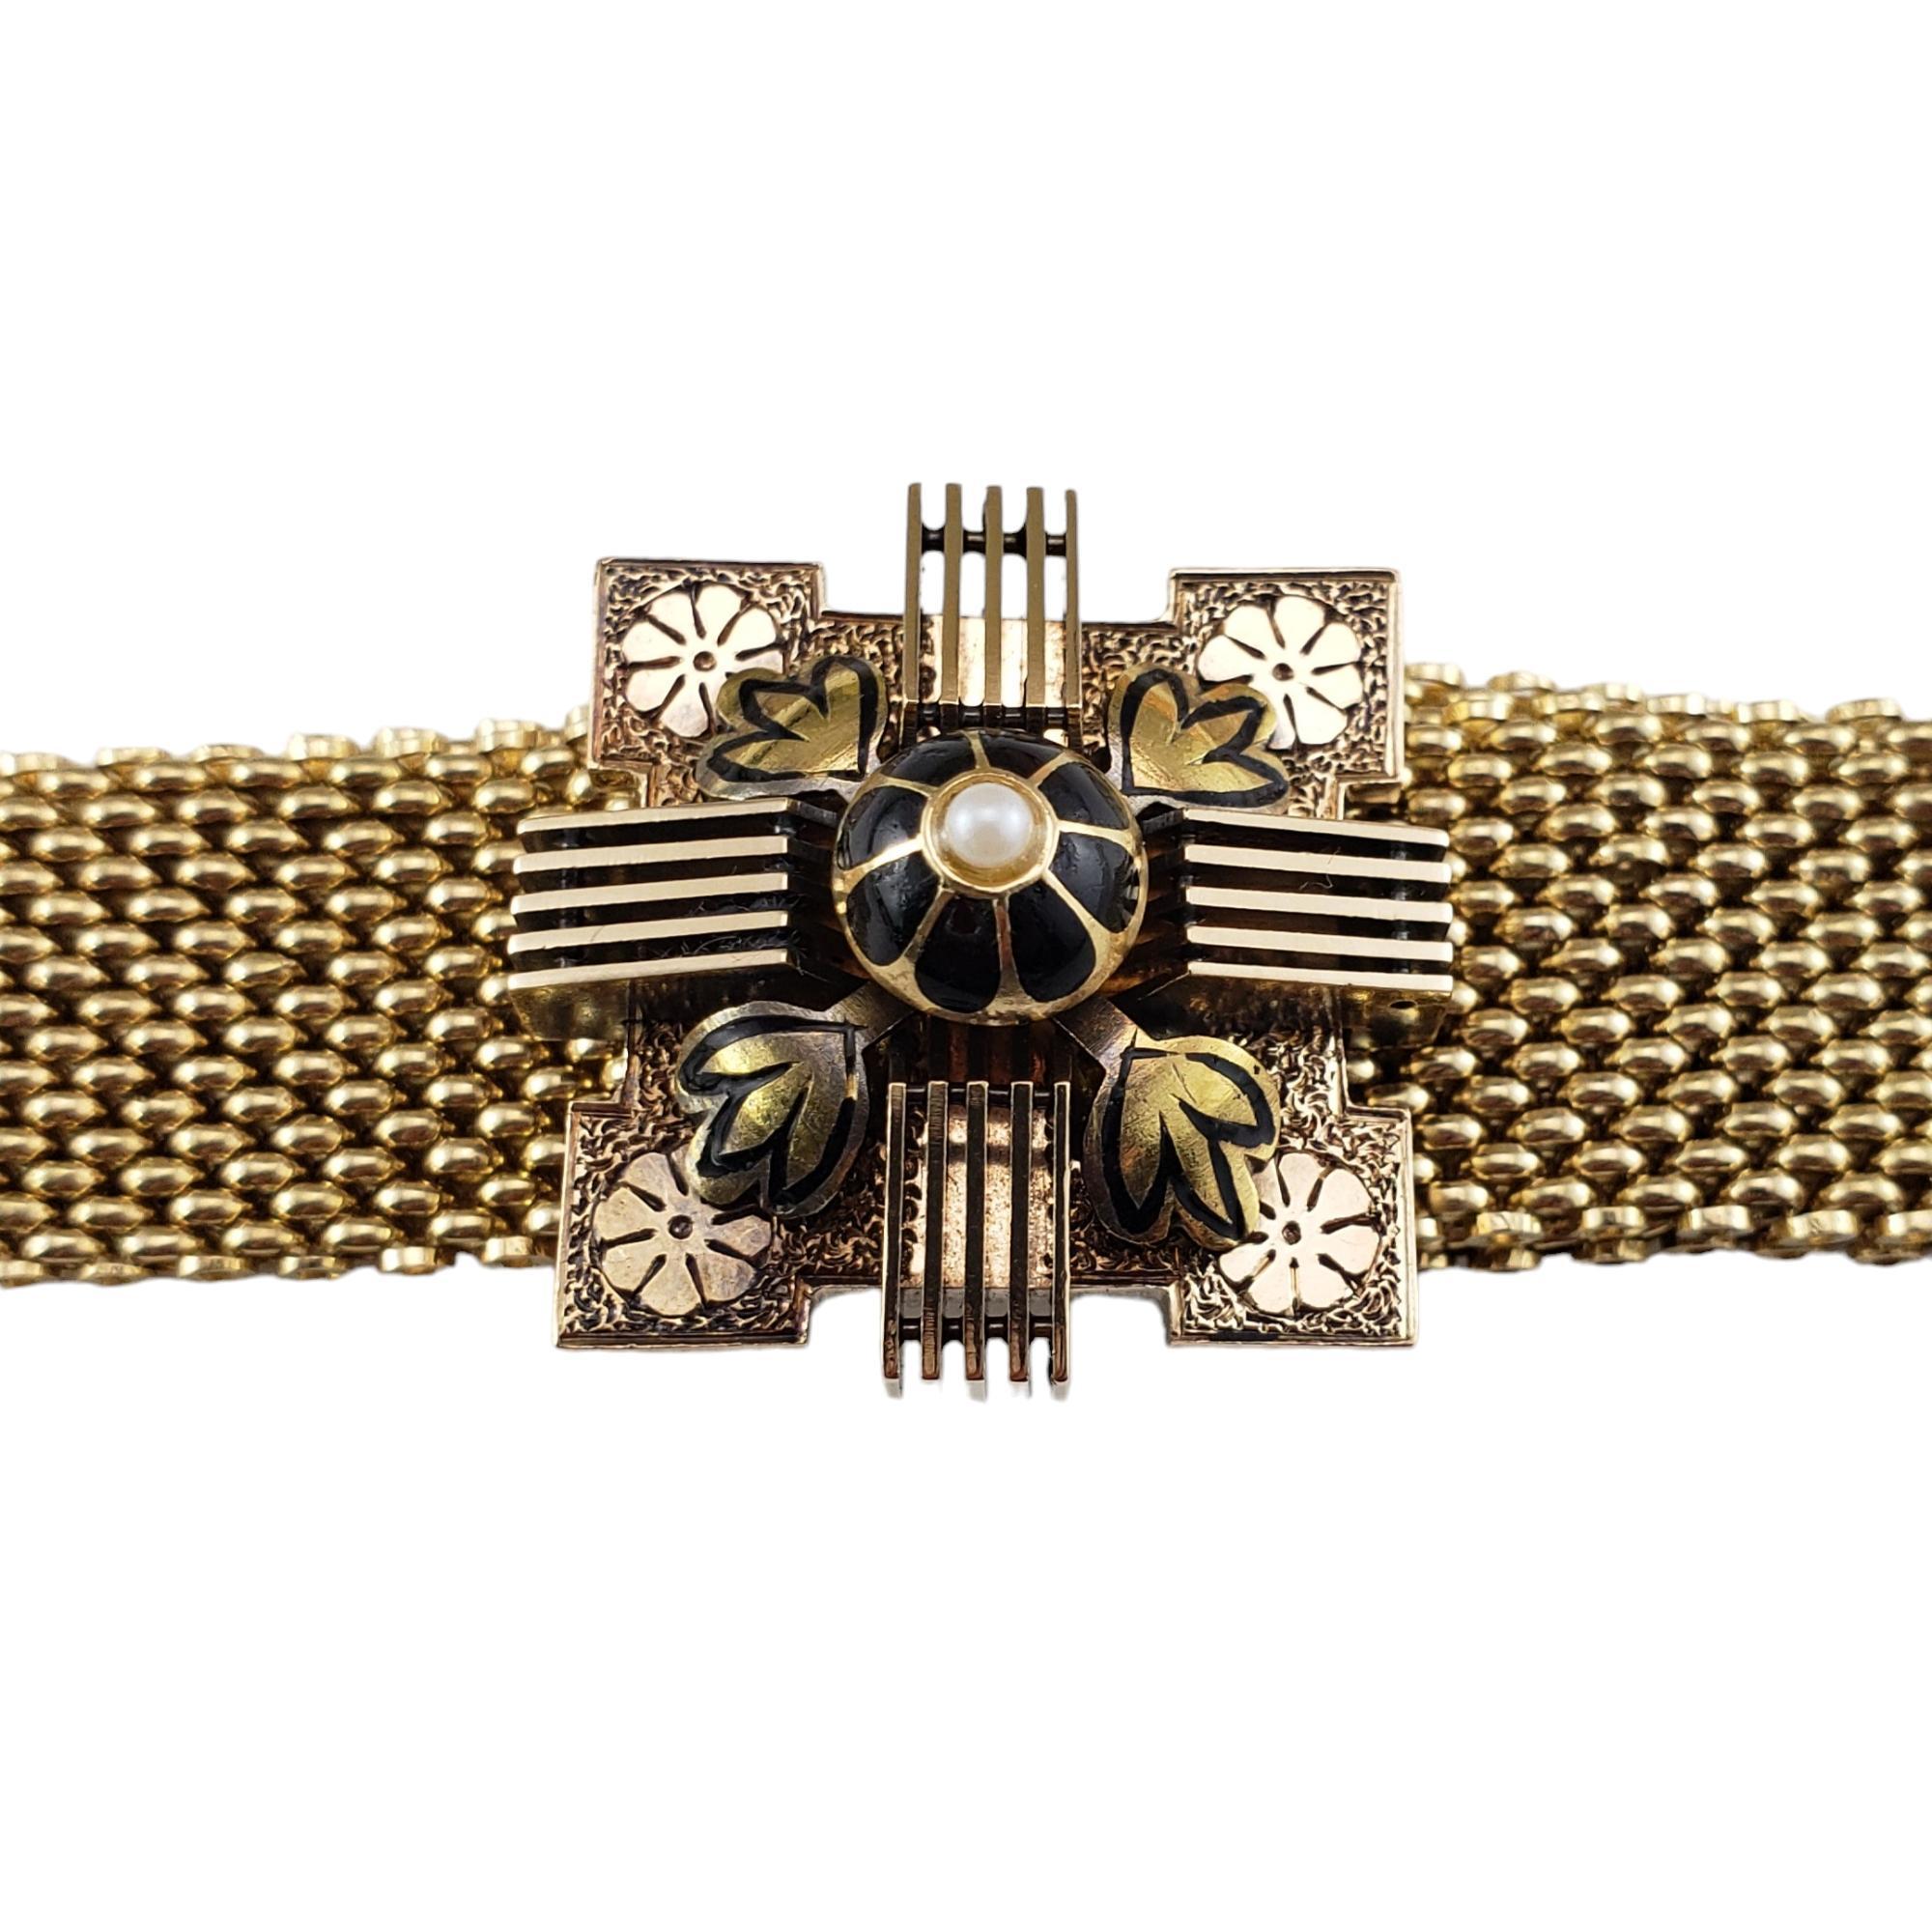 Antique Yellow Gold Mesh Slide Bracelet-

This spectacular mesh bracelet is capped with a fringed tassel and crowned with a decorative slide for which to adjust the bracelet length.  Accented with black enamel and two white pearls.

Slide width: 26